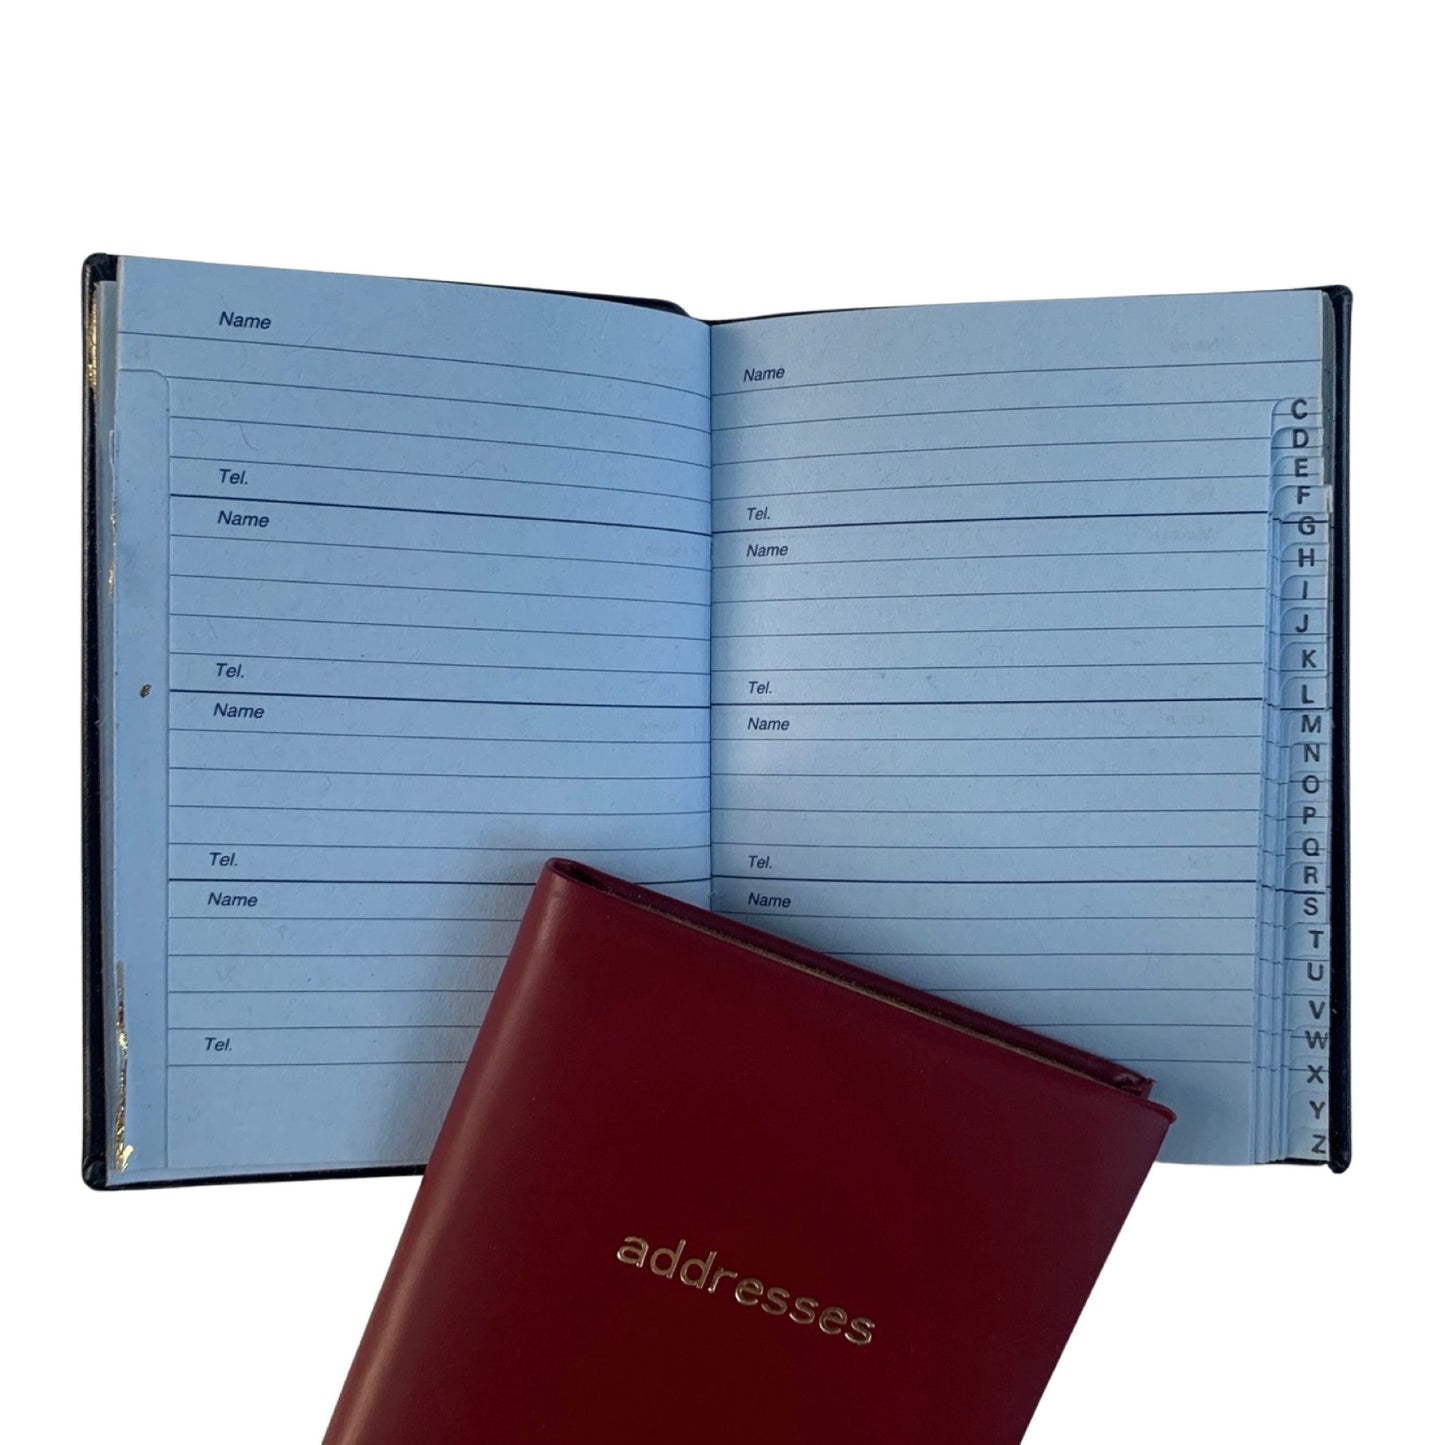 Address Book | 3 by 2.5 inches | Smooth Calf | Made in England | Charing Cross | A32C